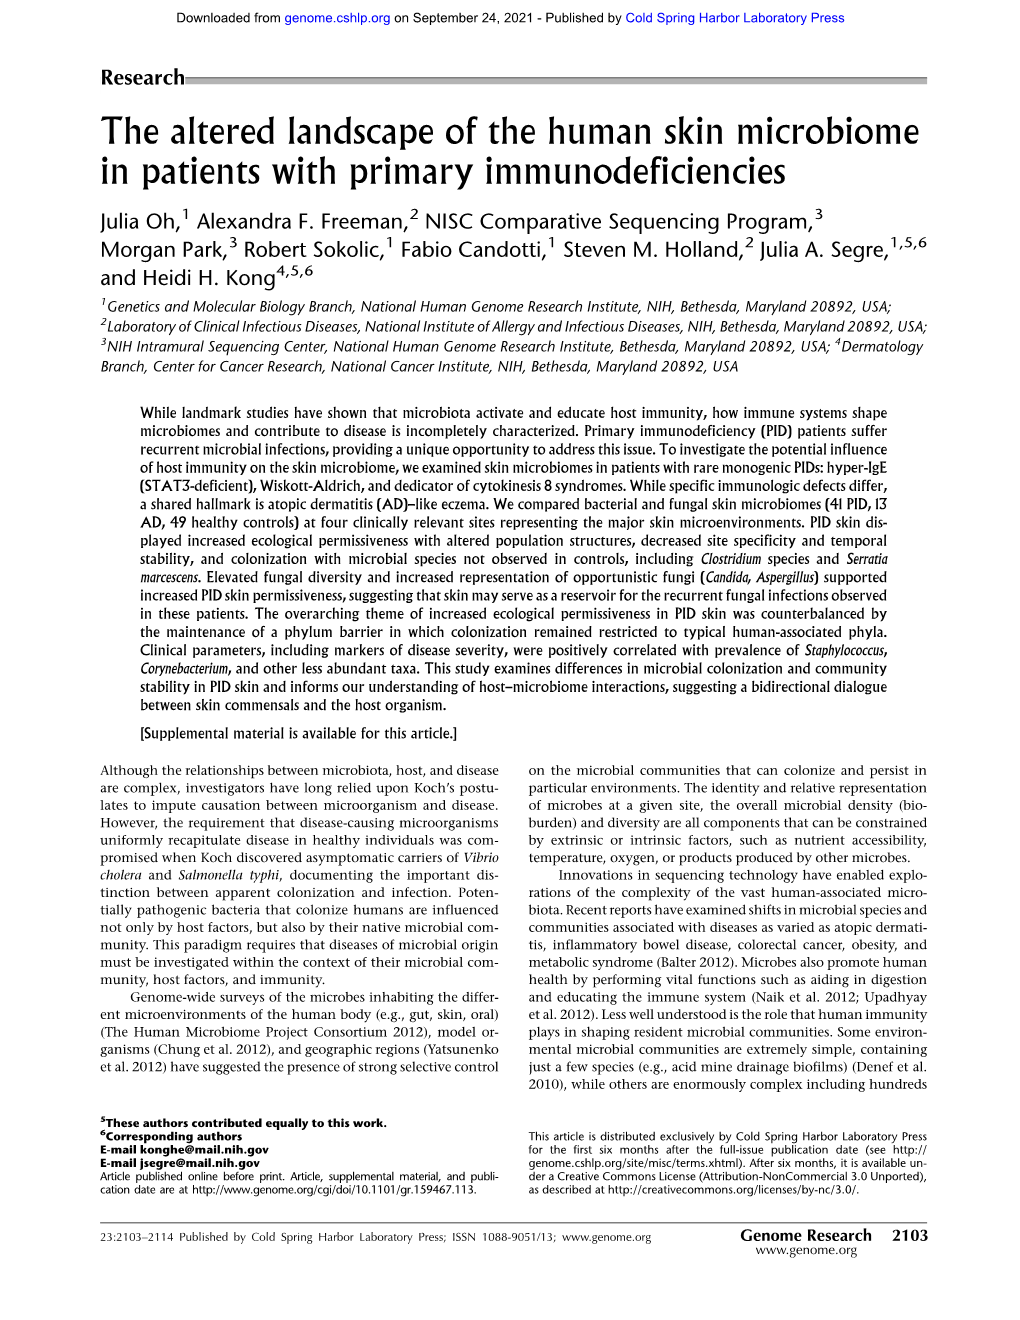 The Altered Landscape of the Human Skin Microbiome in Patients with Primary Immunodeficiencies